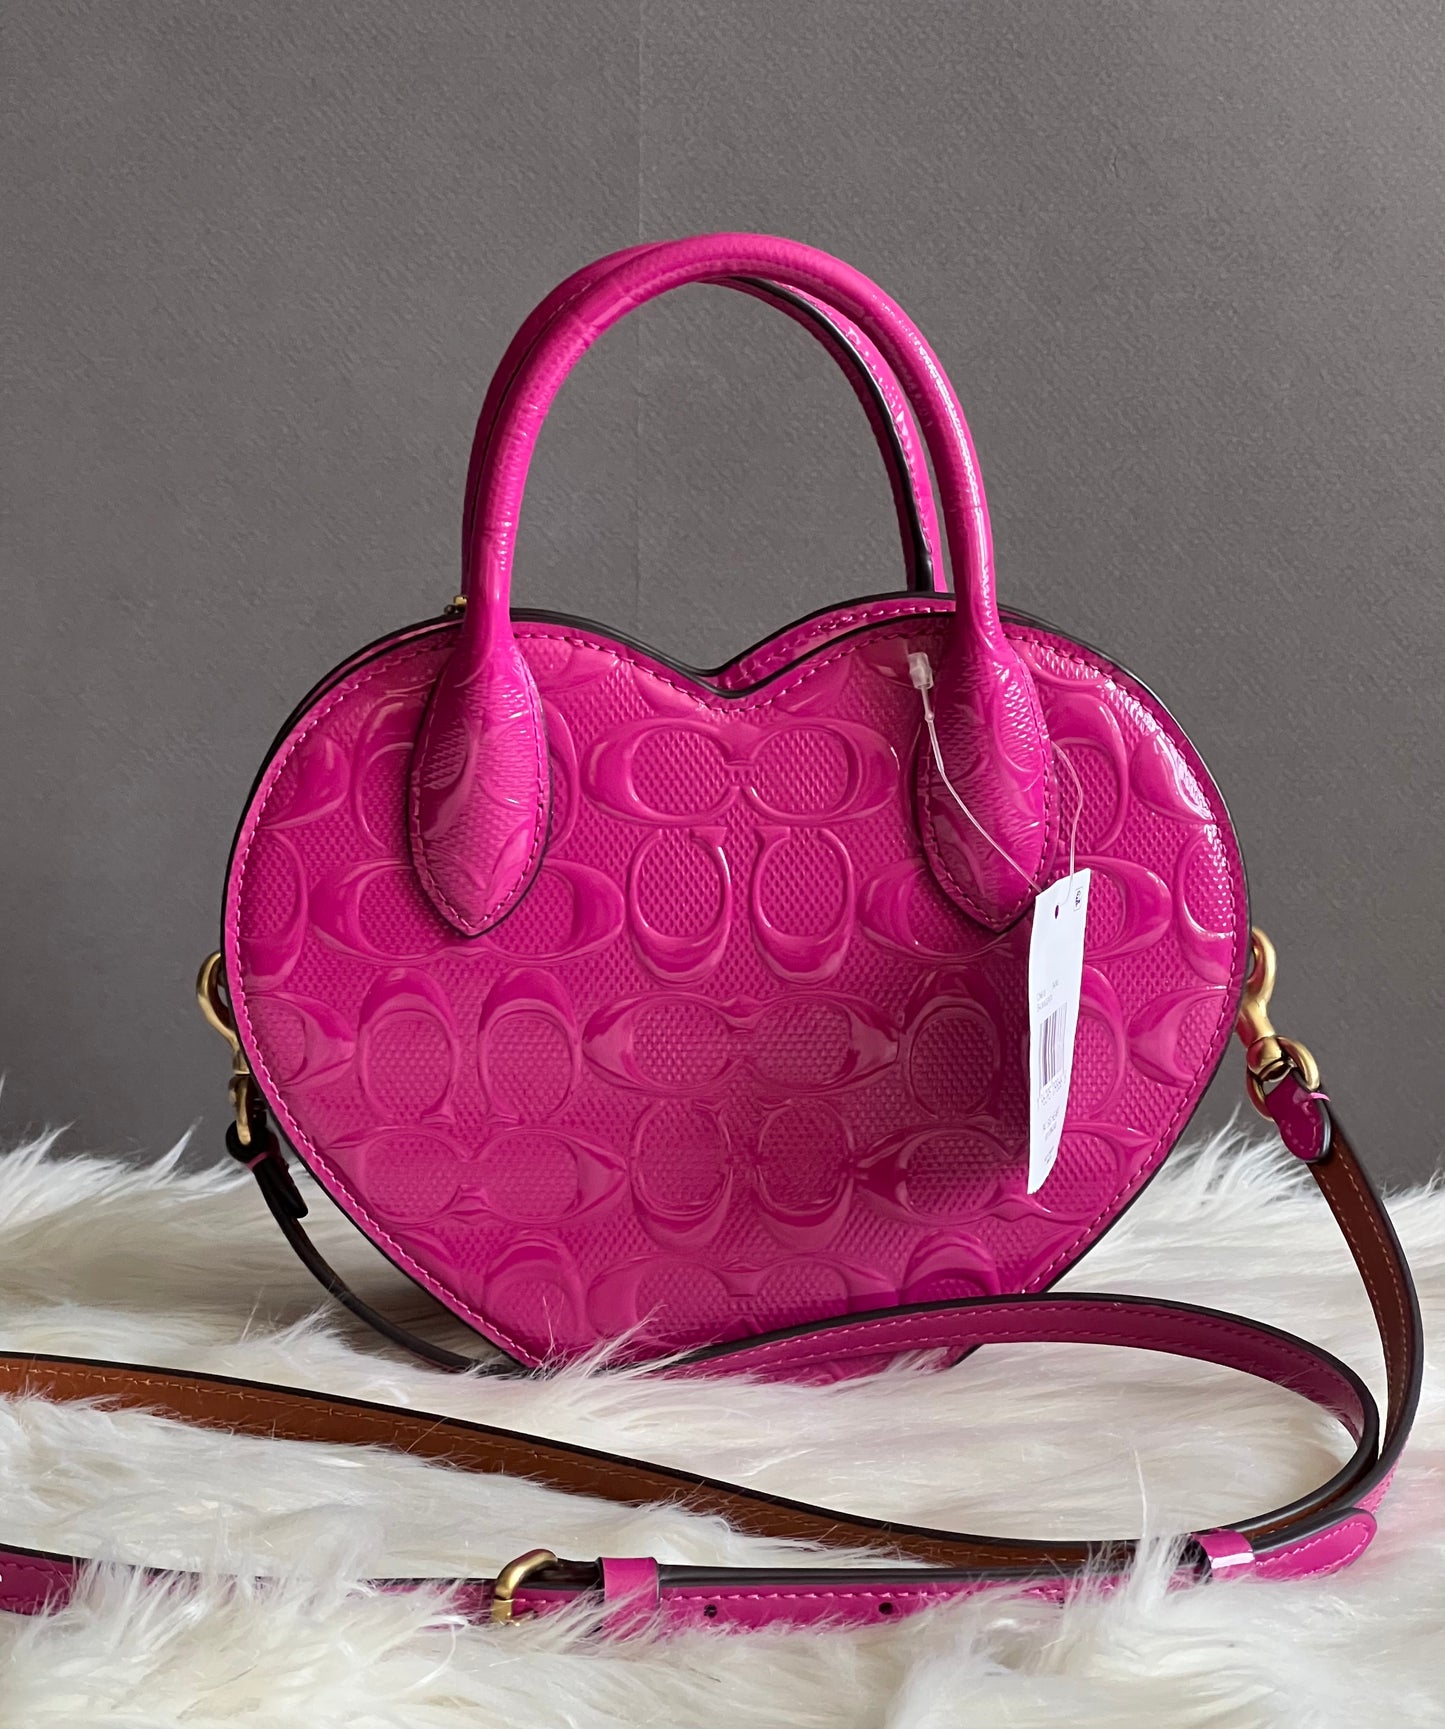 Coach Heart Bag in Signature Leather